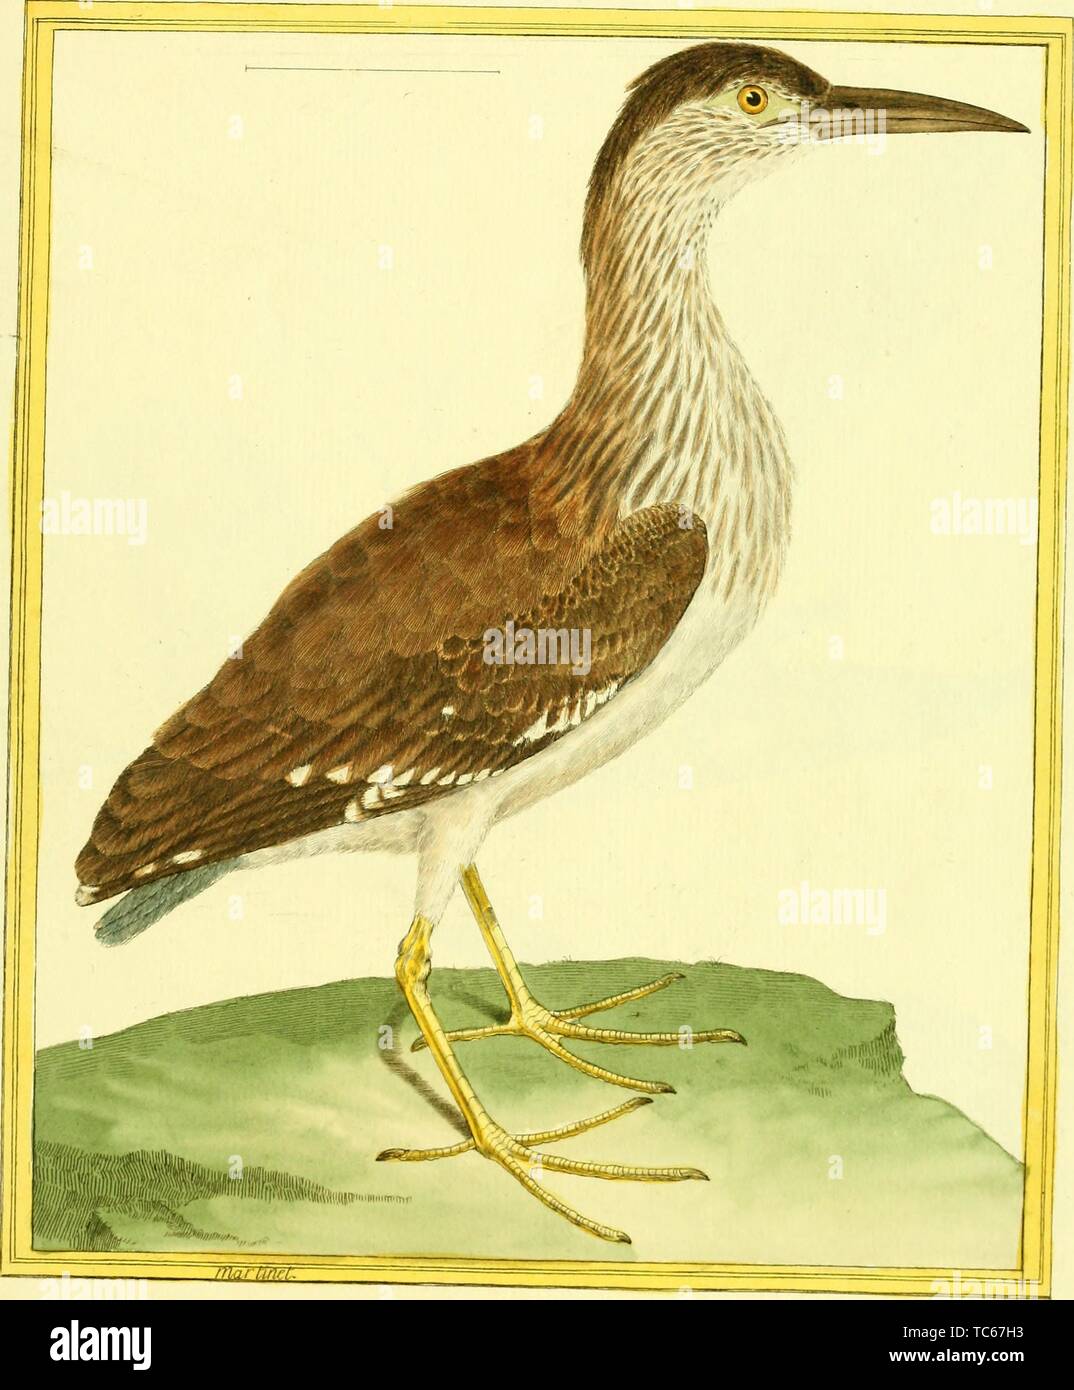 Engraved drawing of the Black-crowned Night Heron (Nycticorax nycticorax), from the book 'Planches enluminees Dhistoire naturelle' by Francois Nicolas, Louis Jean Marie Daubenton, and Edme-Louis Daubenton, 1765. Courtesy Internet Archive. () Stock Photo